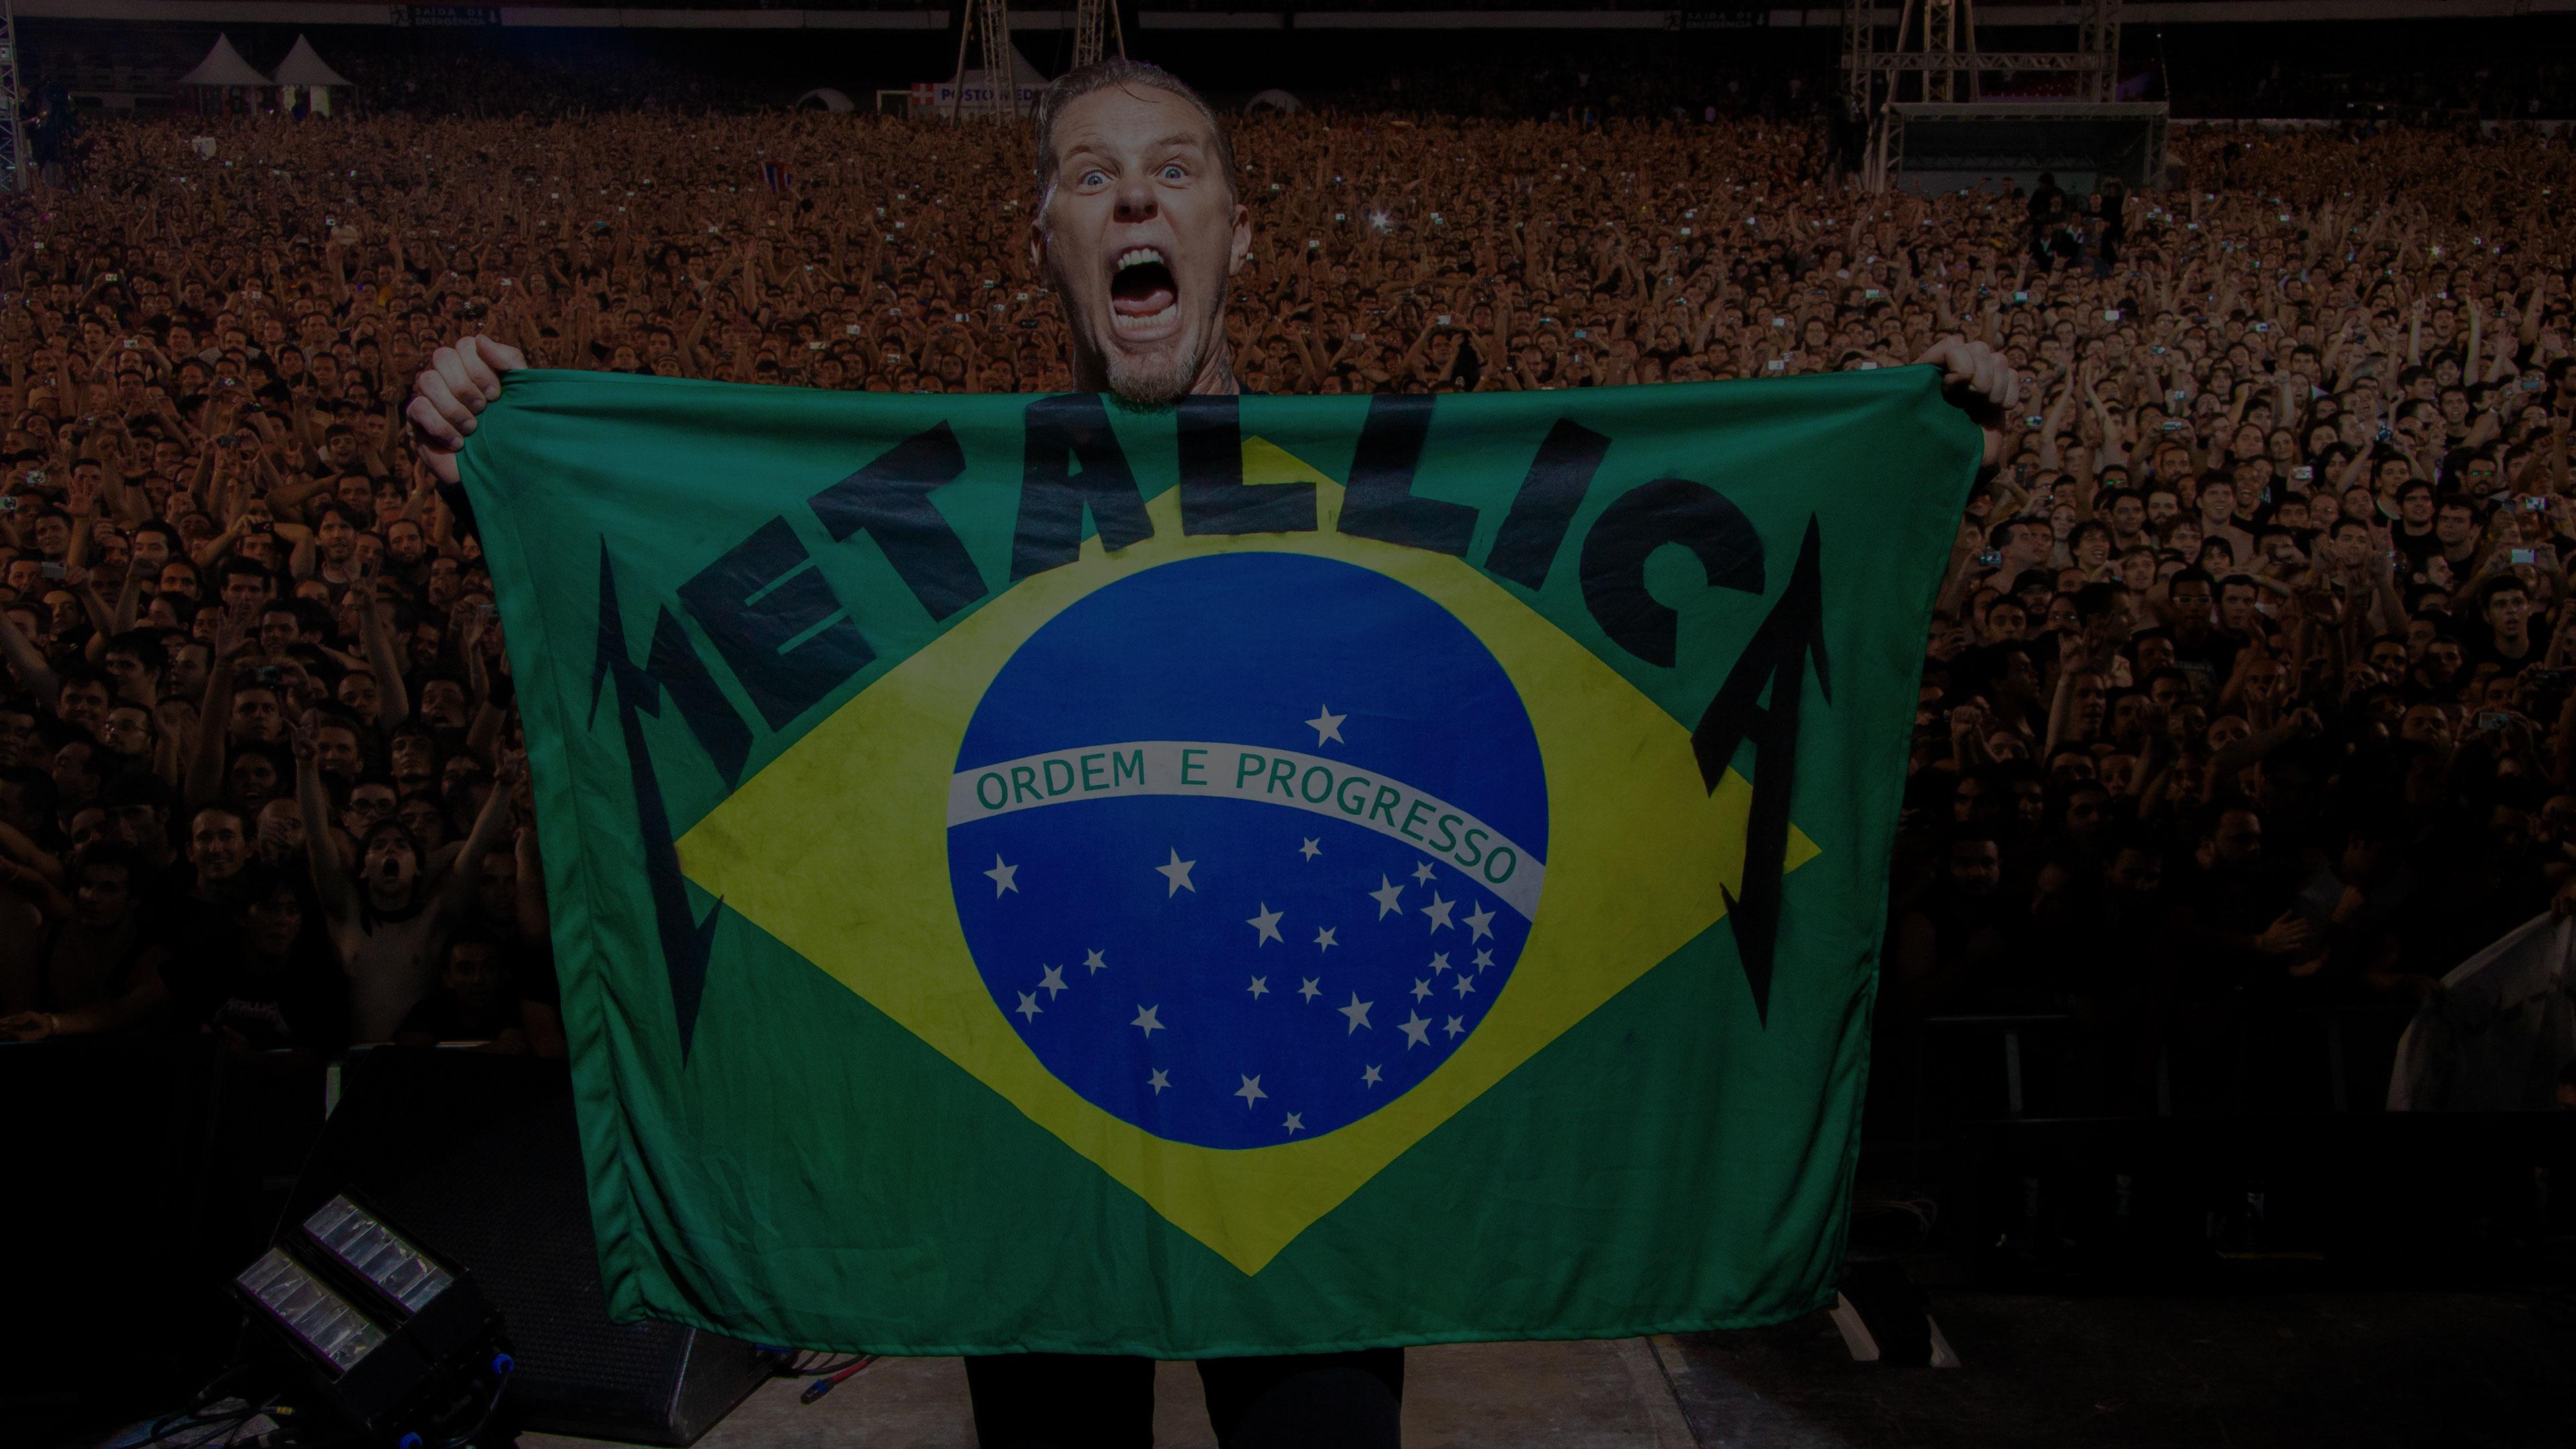 Banner Image for the photo gallery from the gig in São Paulo, Brazil shot on January 30, 2010